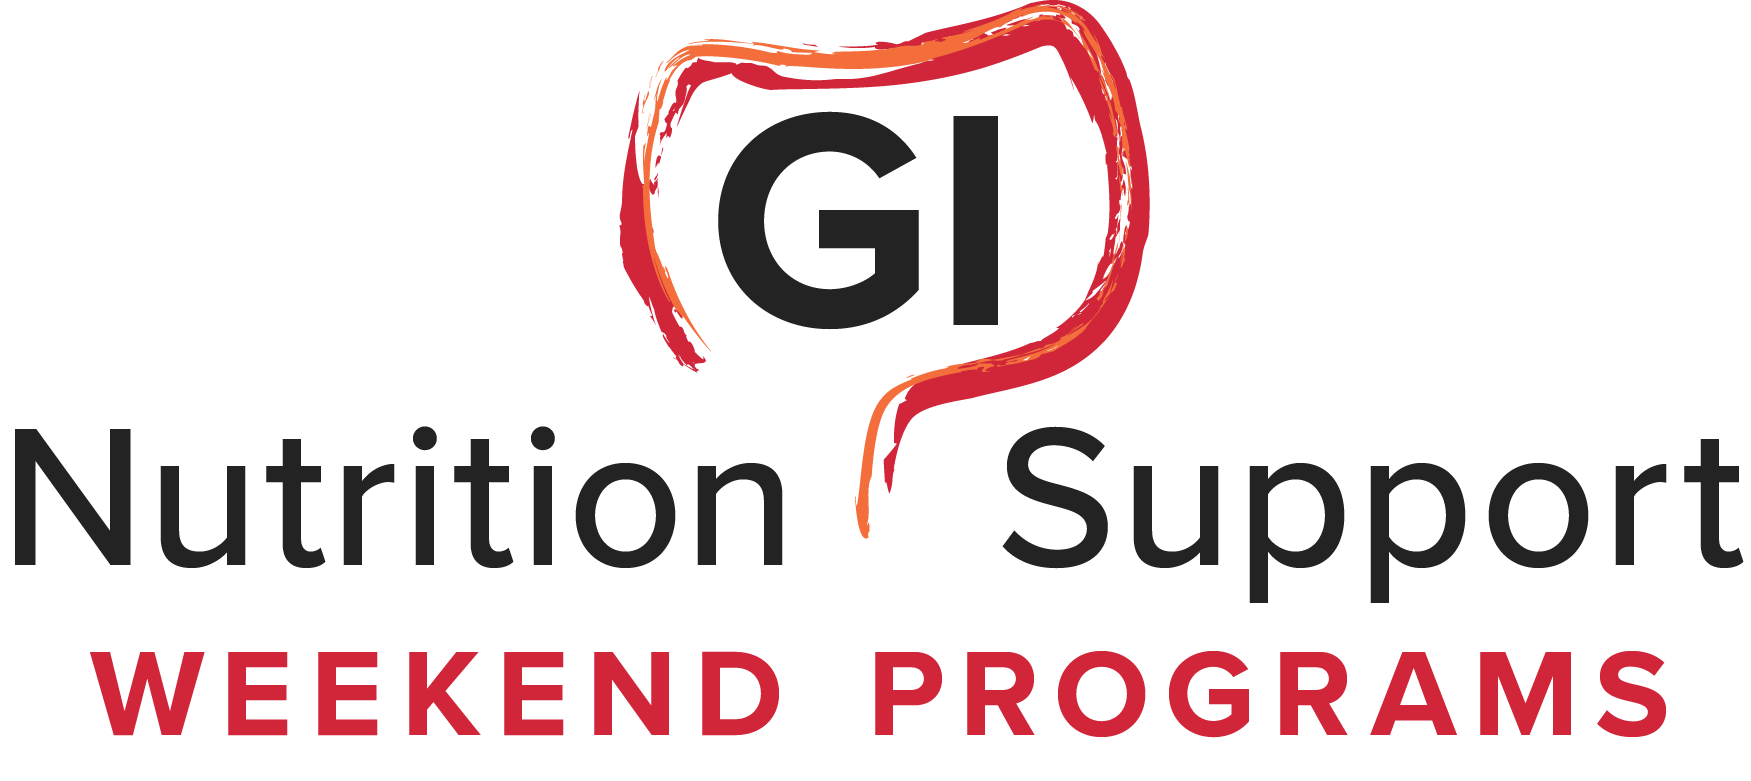 GI Nutrition Support